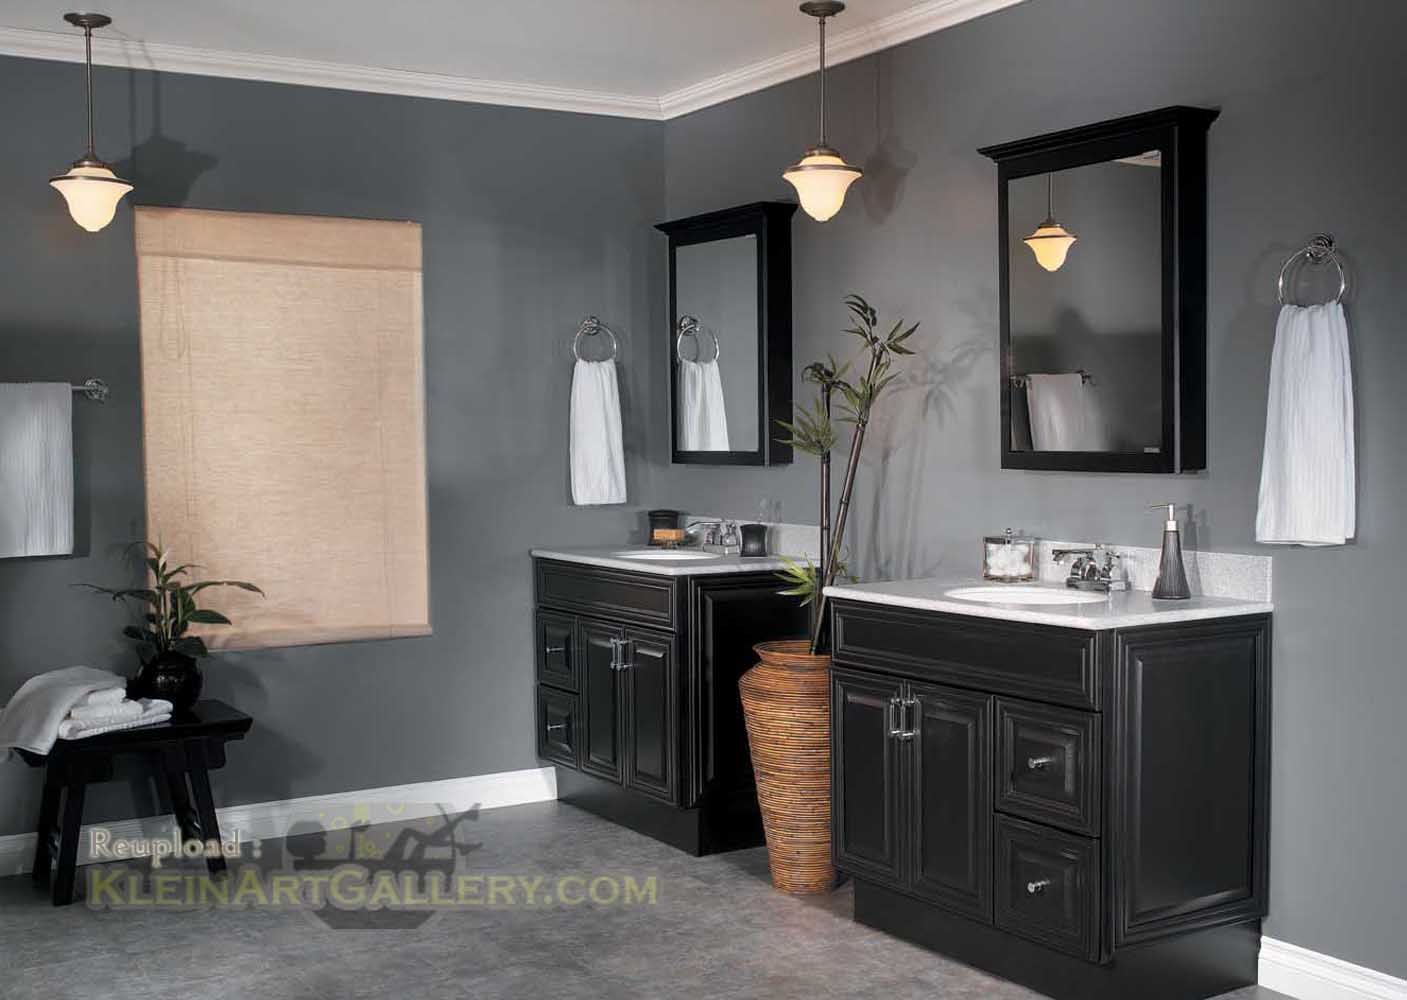 Bathroom Color Ideas With Dark Cabinets Bathroom In 2019 Black pertaining to dimensions 1407 X 1000